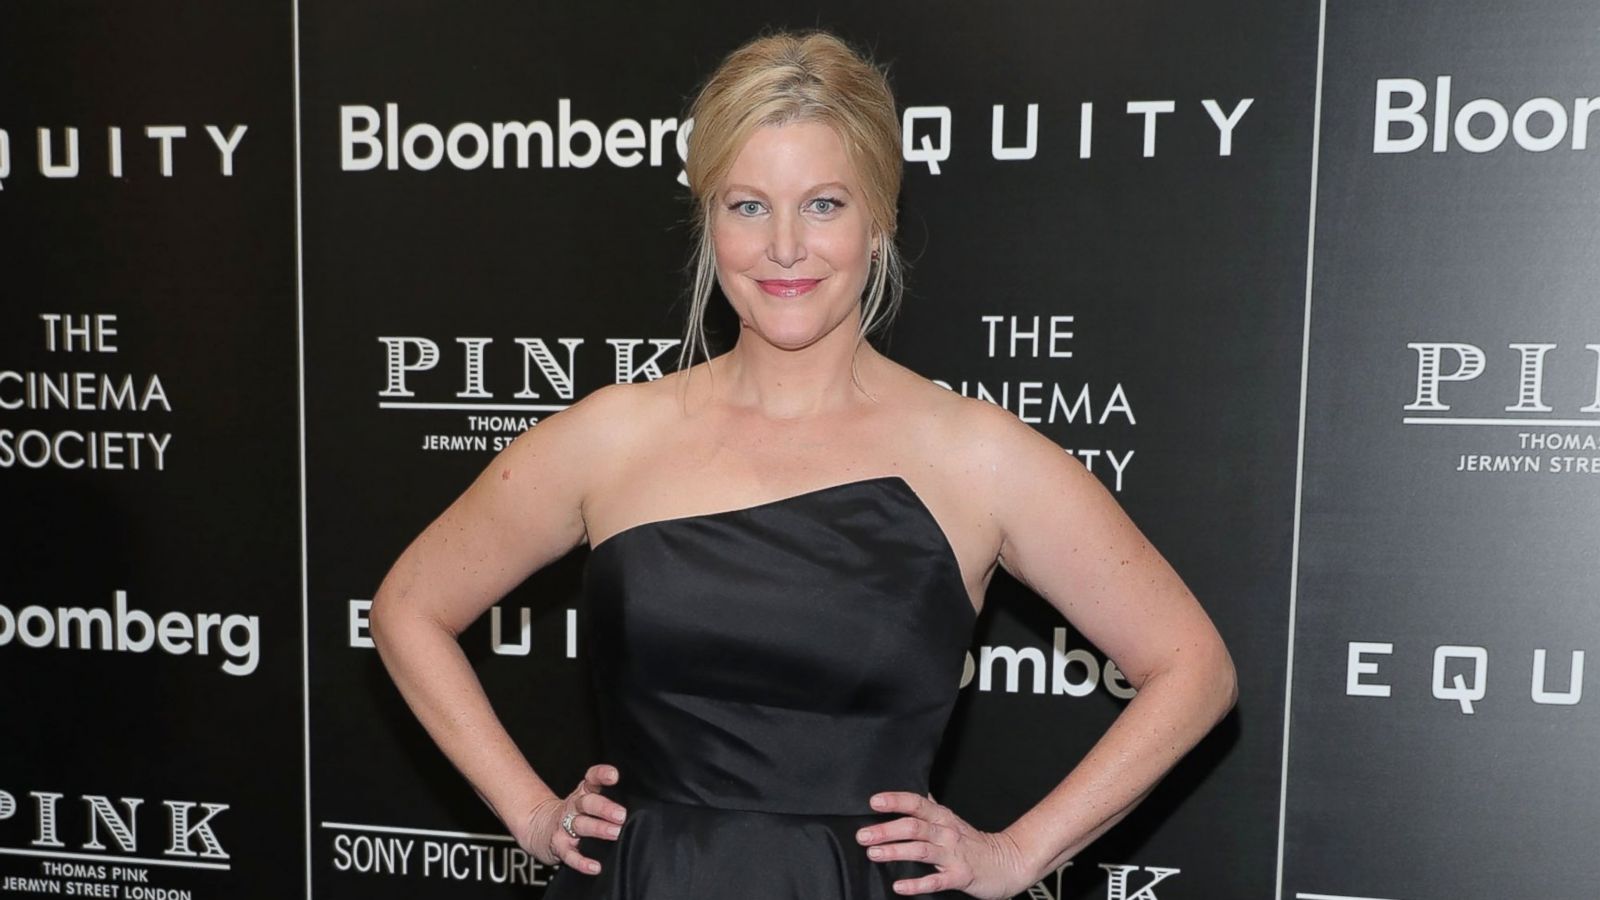 Anna Gunn on Her New Film 'Equity' and 'Breaking Bad'